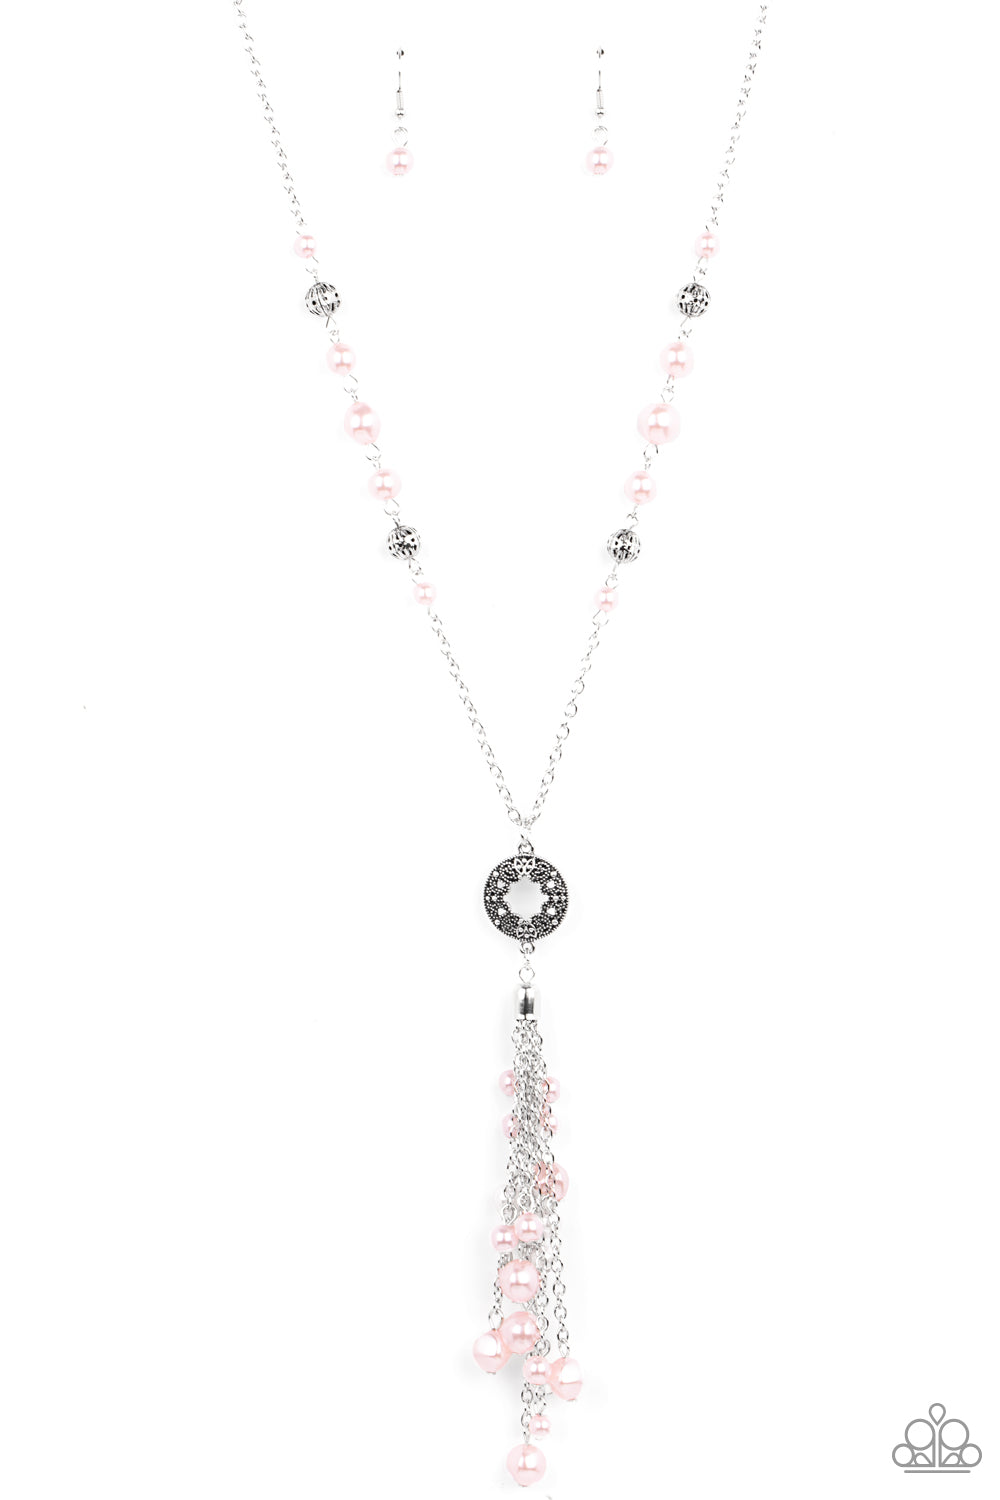 Tasseled Treasure Pink Necklace - Paparazzi Accessories  Dotted with sections of ornate silver beads and imperfect pink pearls, a lengthened silver chain gives way to a filigree studded pendant. Dotted with matching pearls, shiny silver chains join into a timelessly clustered tassel at the bottom of the refined pendant. Features an adjustable clasp closure.  ﻿All Paparazzi Accessories are lead free and nickel free!  Sold as one individual necklace. Includes one pair of matching earrings.